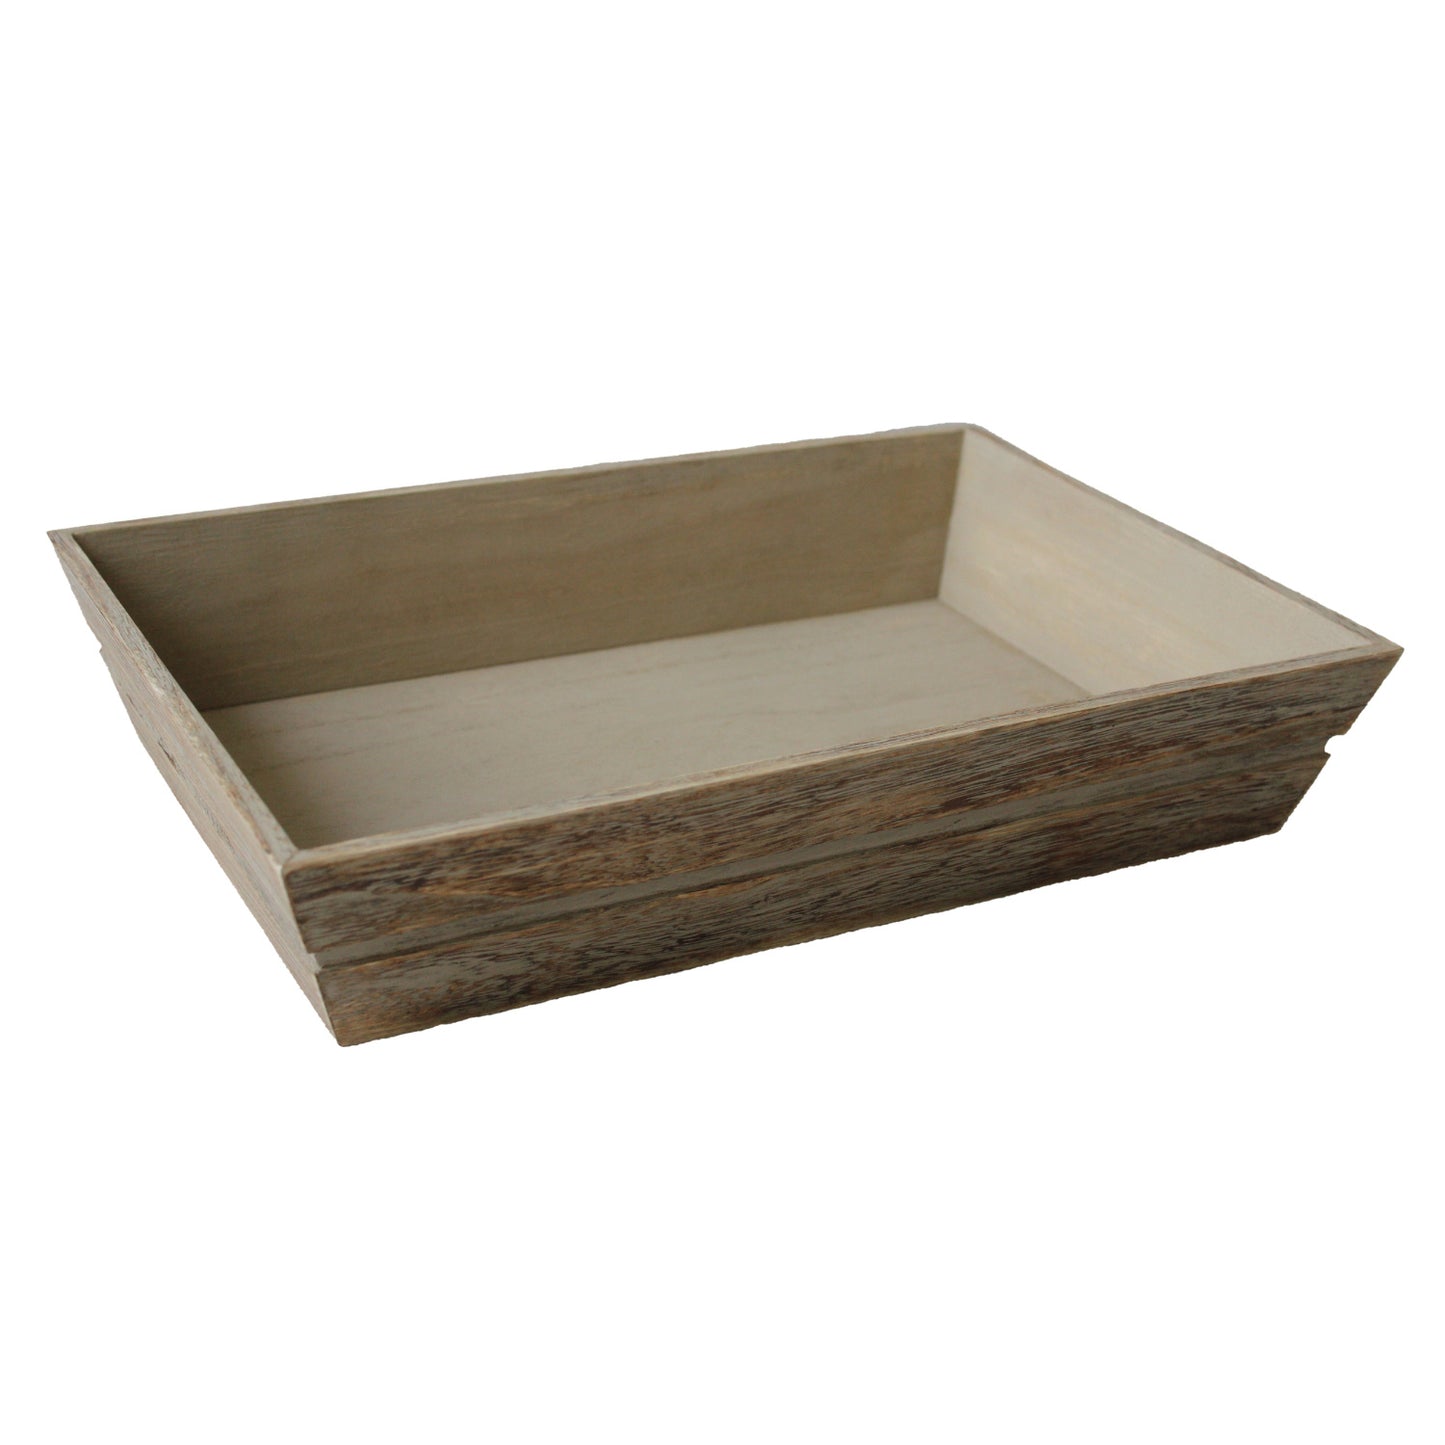 Large Wooden Packing Tray